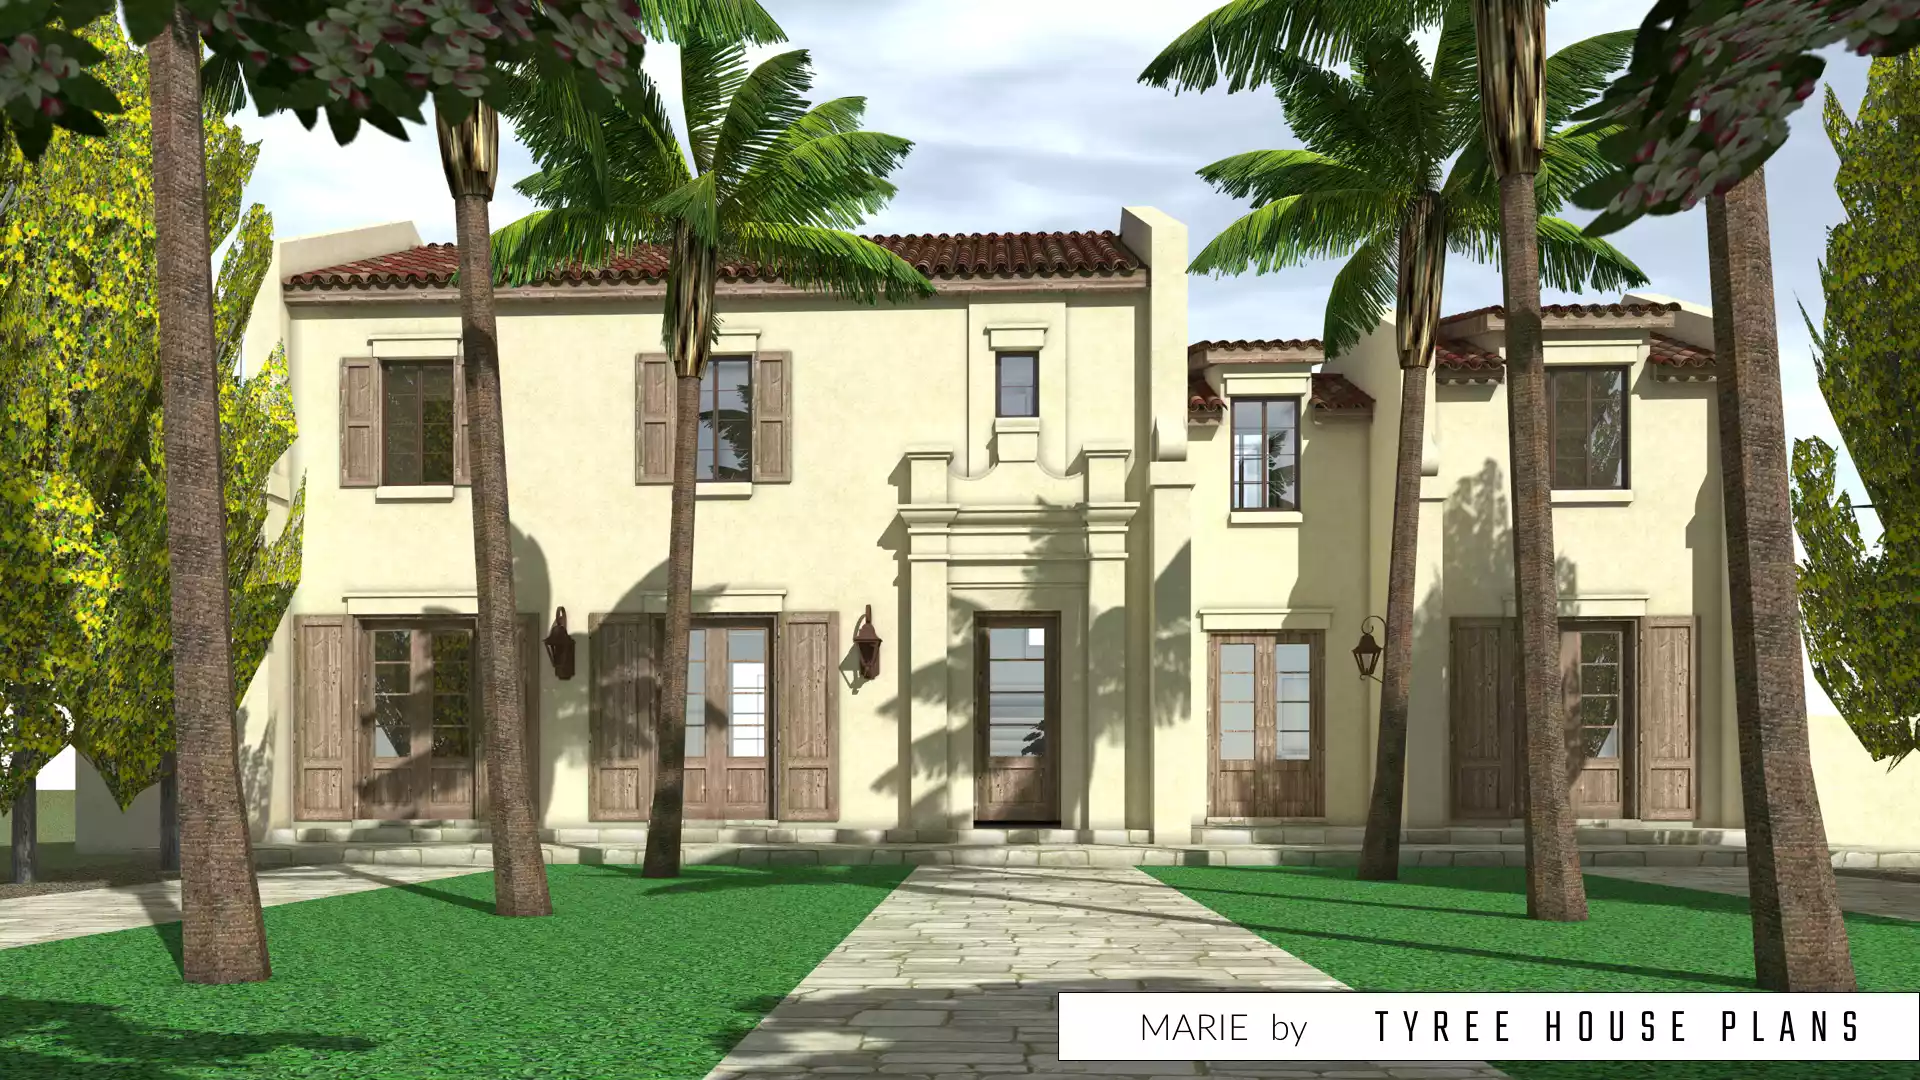 Marie by Tyree House Plans.